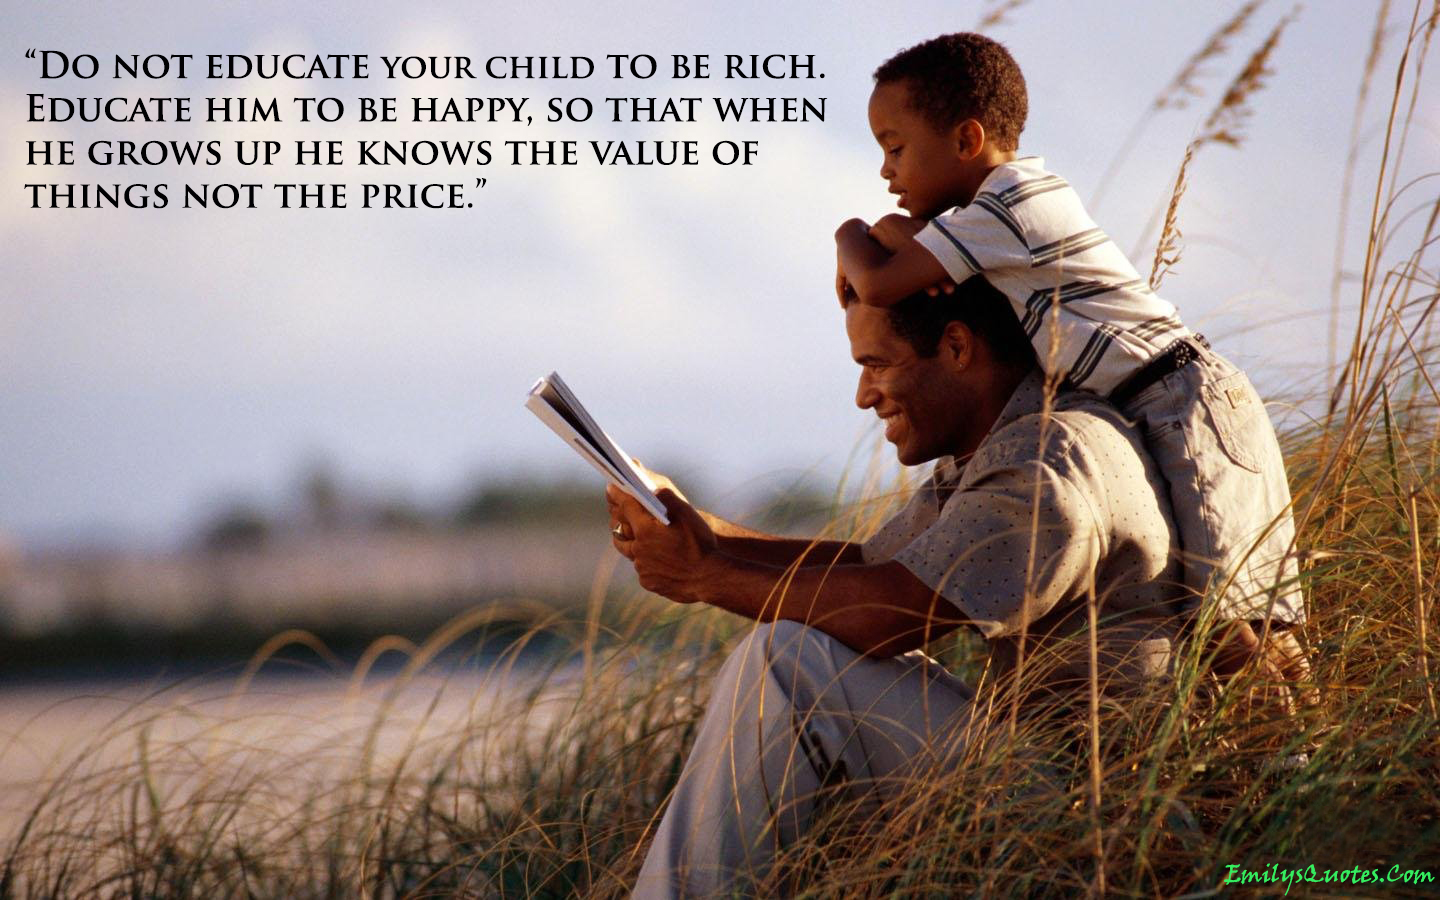 Do not educate your child to be rich. Educate him to be happy